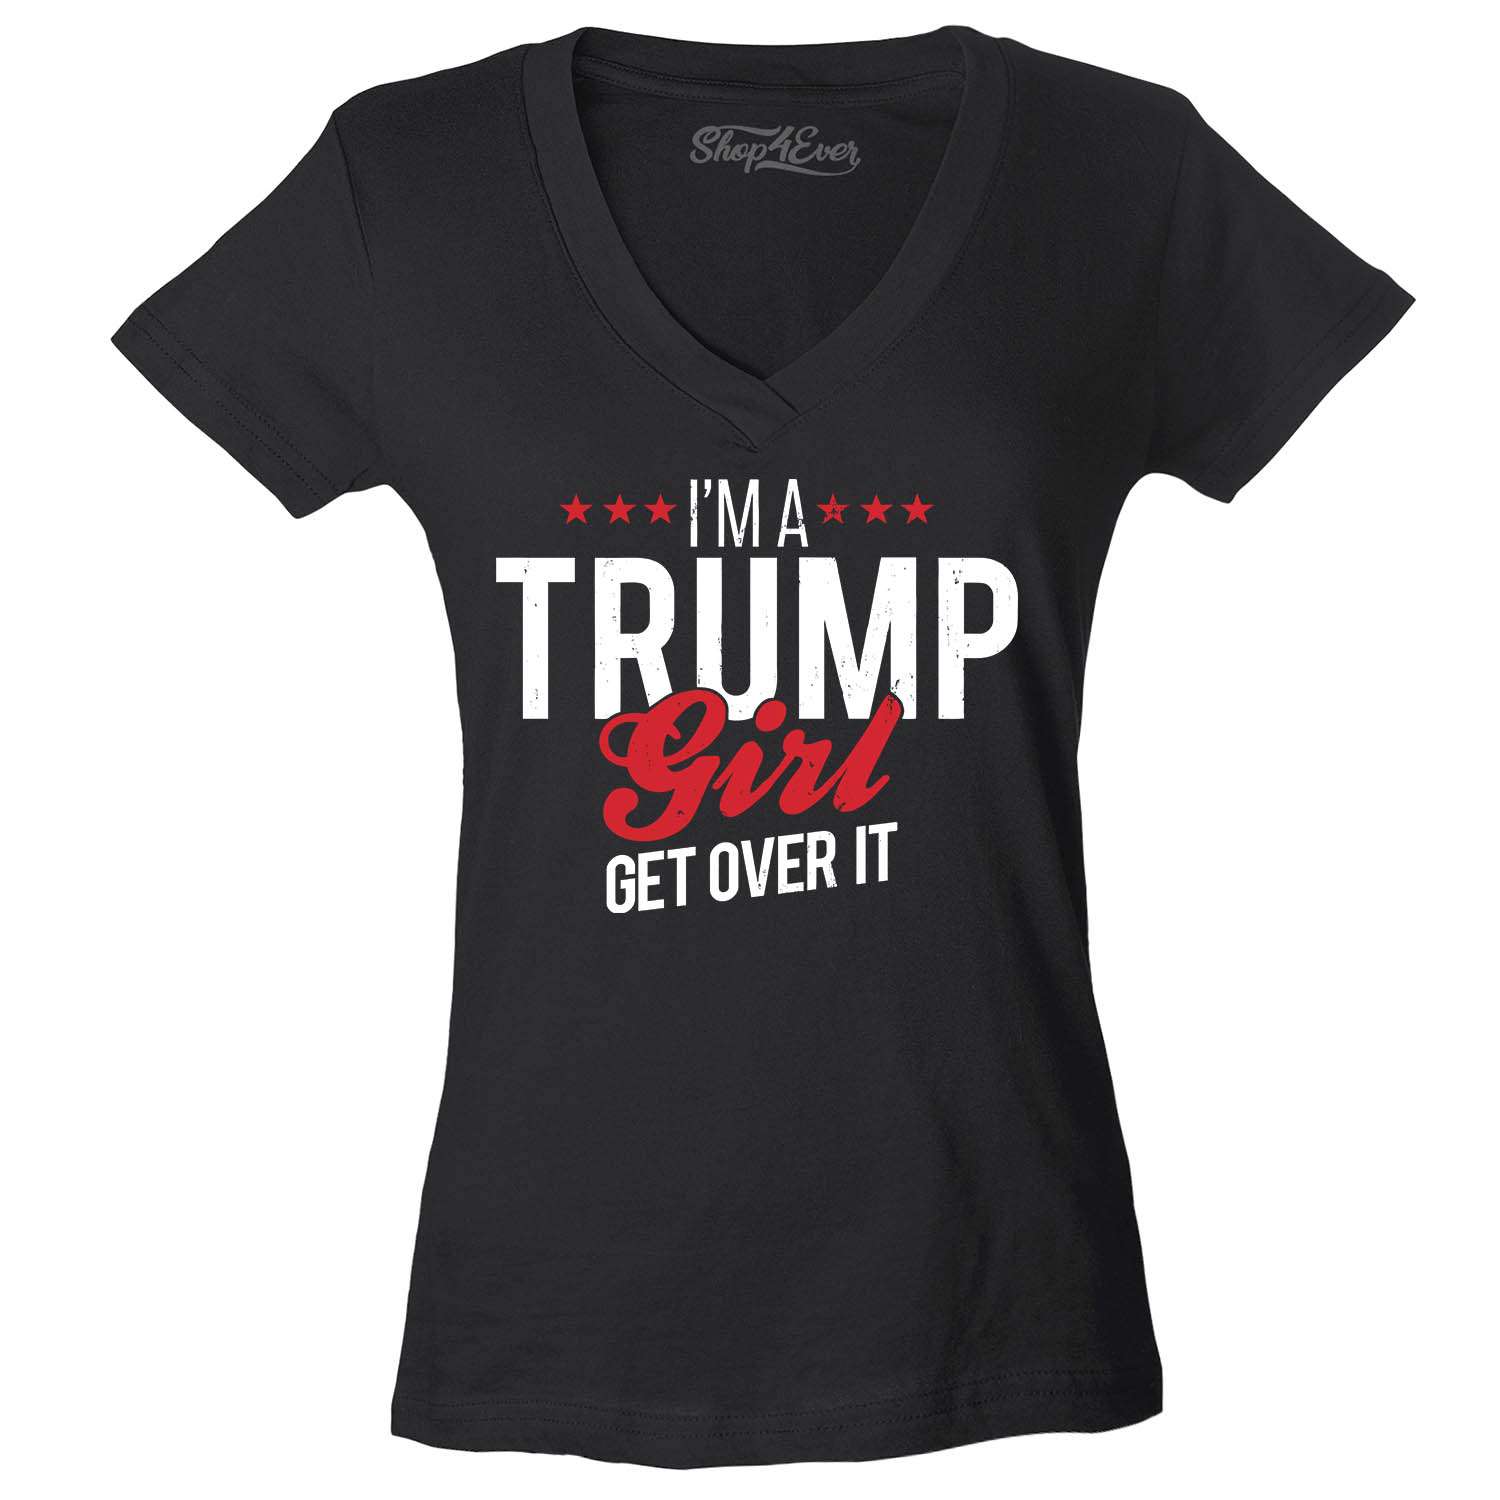 Yes I'm A Trump Girl Get Over It Trump 2020 Women T Shirt Cotton S-5XL Black